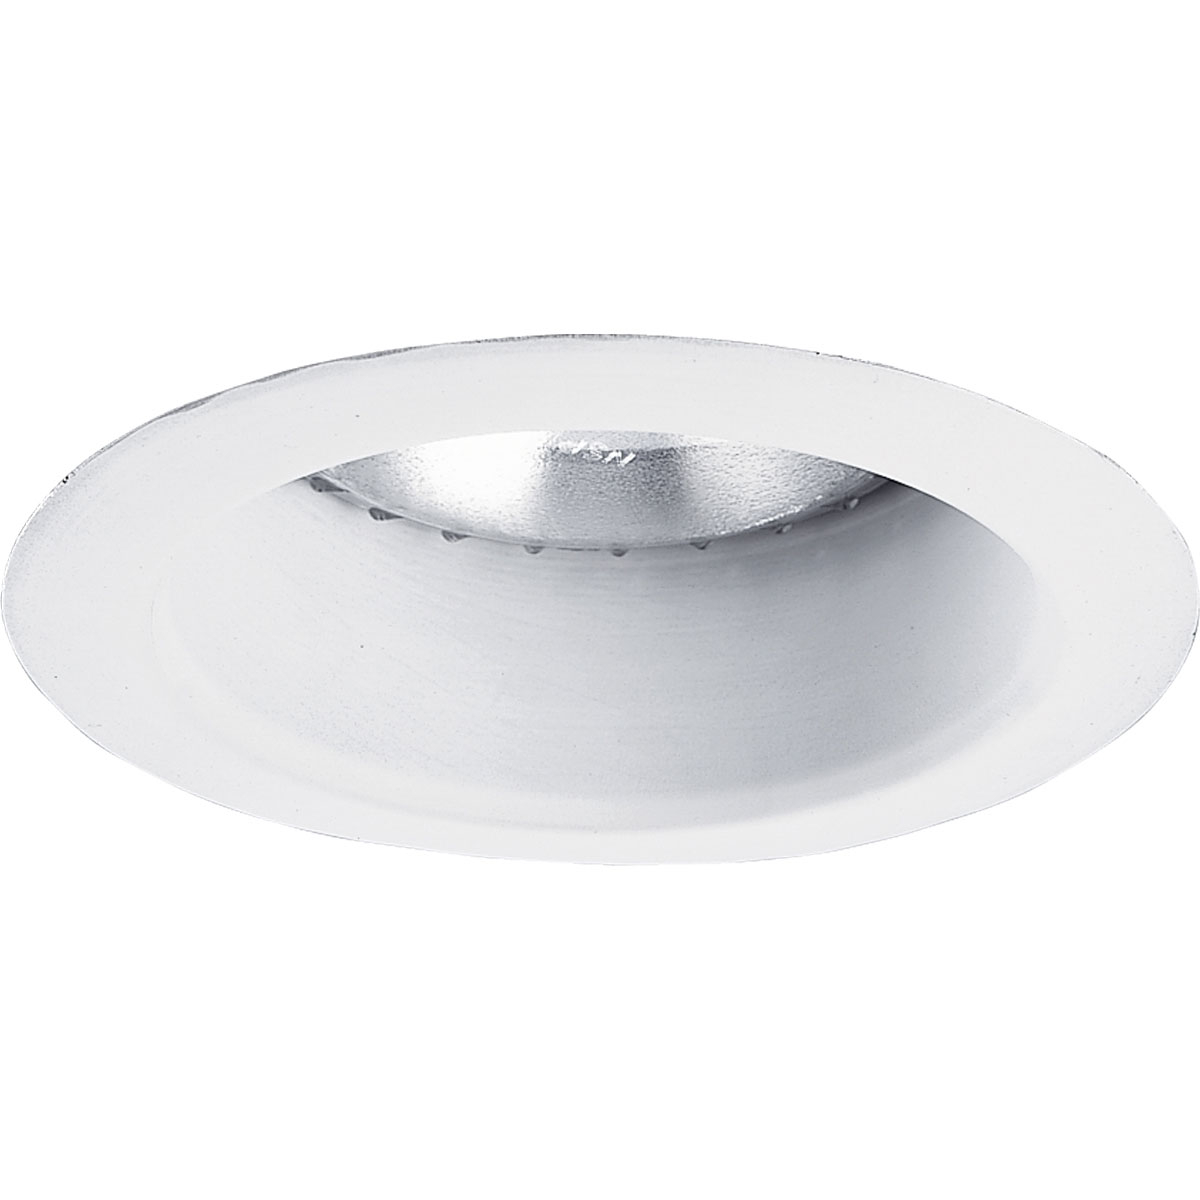 5 in Shallow Alzak Cone & White Open Reflector Recessed Trim. Comes in a Bright White Alzak finish. One-piece construction with integral matching bright white powder painted metal flange.